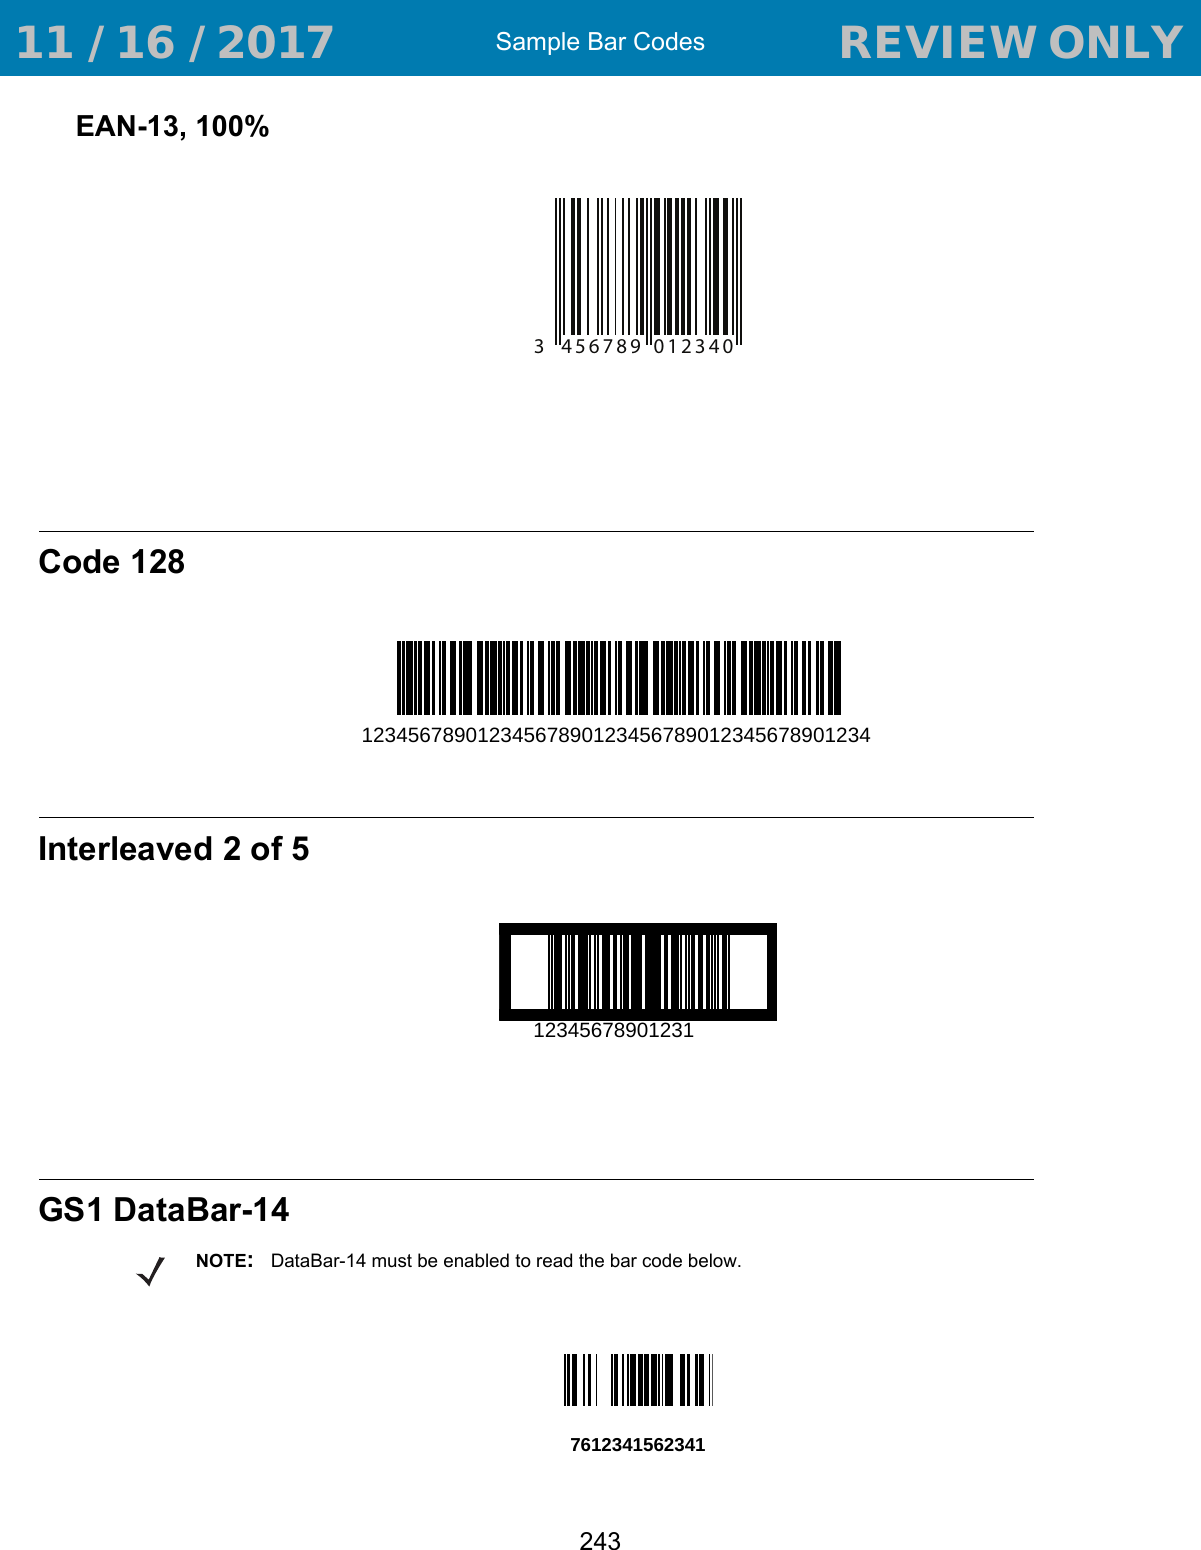 Sample Bar Codes243EAN-13, 100%Code 128Interleaved 2 of 5GS1 DataBar-1476123415623413 4 5 6 7 8 9 0 1 2 3 4 01234567890123456789012345678901234567890123412345678901231NOTE:DataBar-14 must be enabled to read the bar code below. 11 / 16 / 2017                                  REVIEW ONLY                             REVIEW ONLY - REVIEW ONLY - REVIEW ONLY